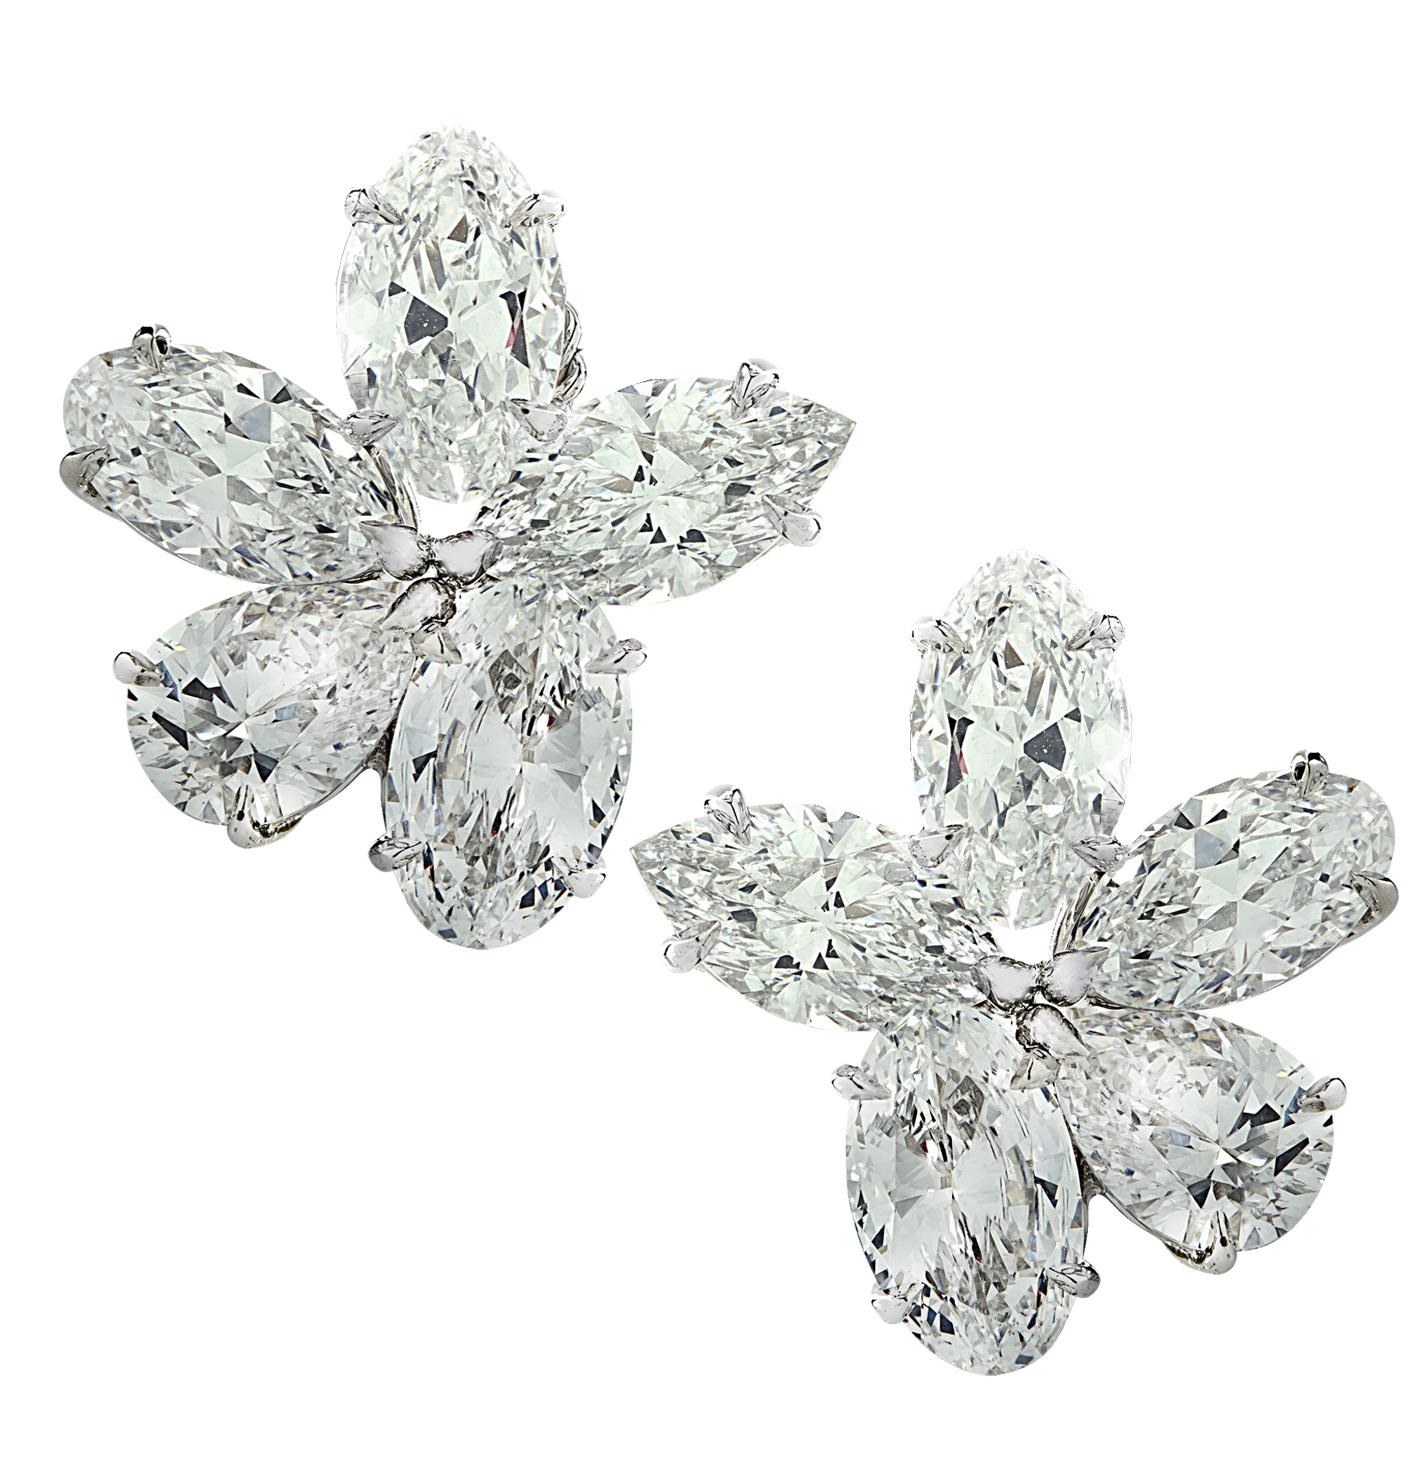  Vivid Diamonds GIA Certified 9.91 Carat Diamond Flower Cluster Earrings In New Condition For Sale In Miami, FL